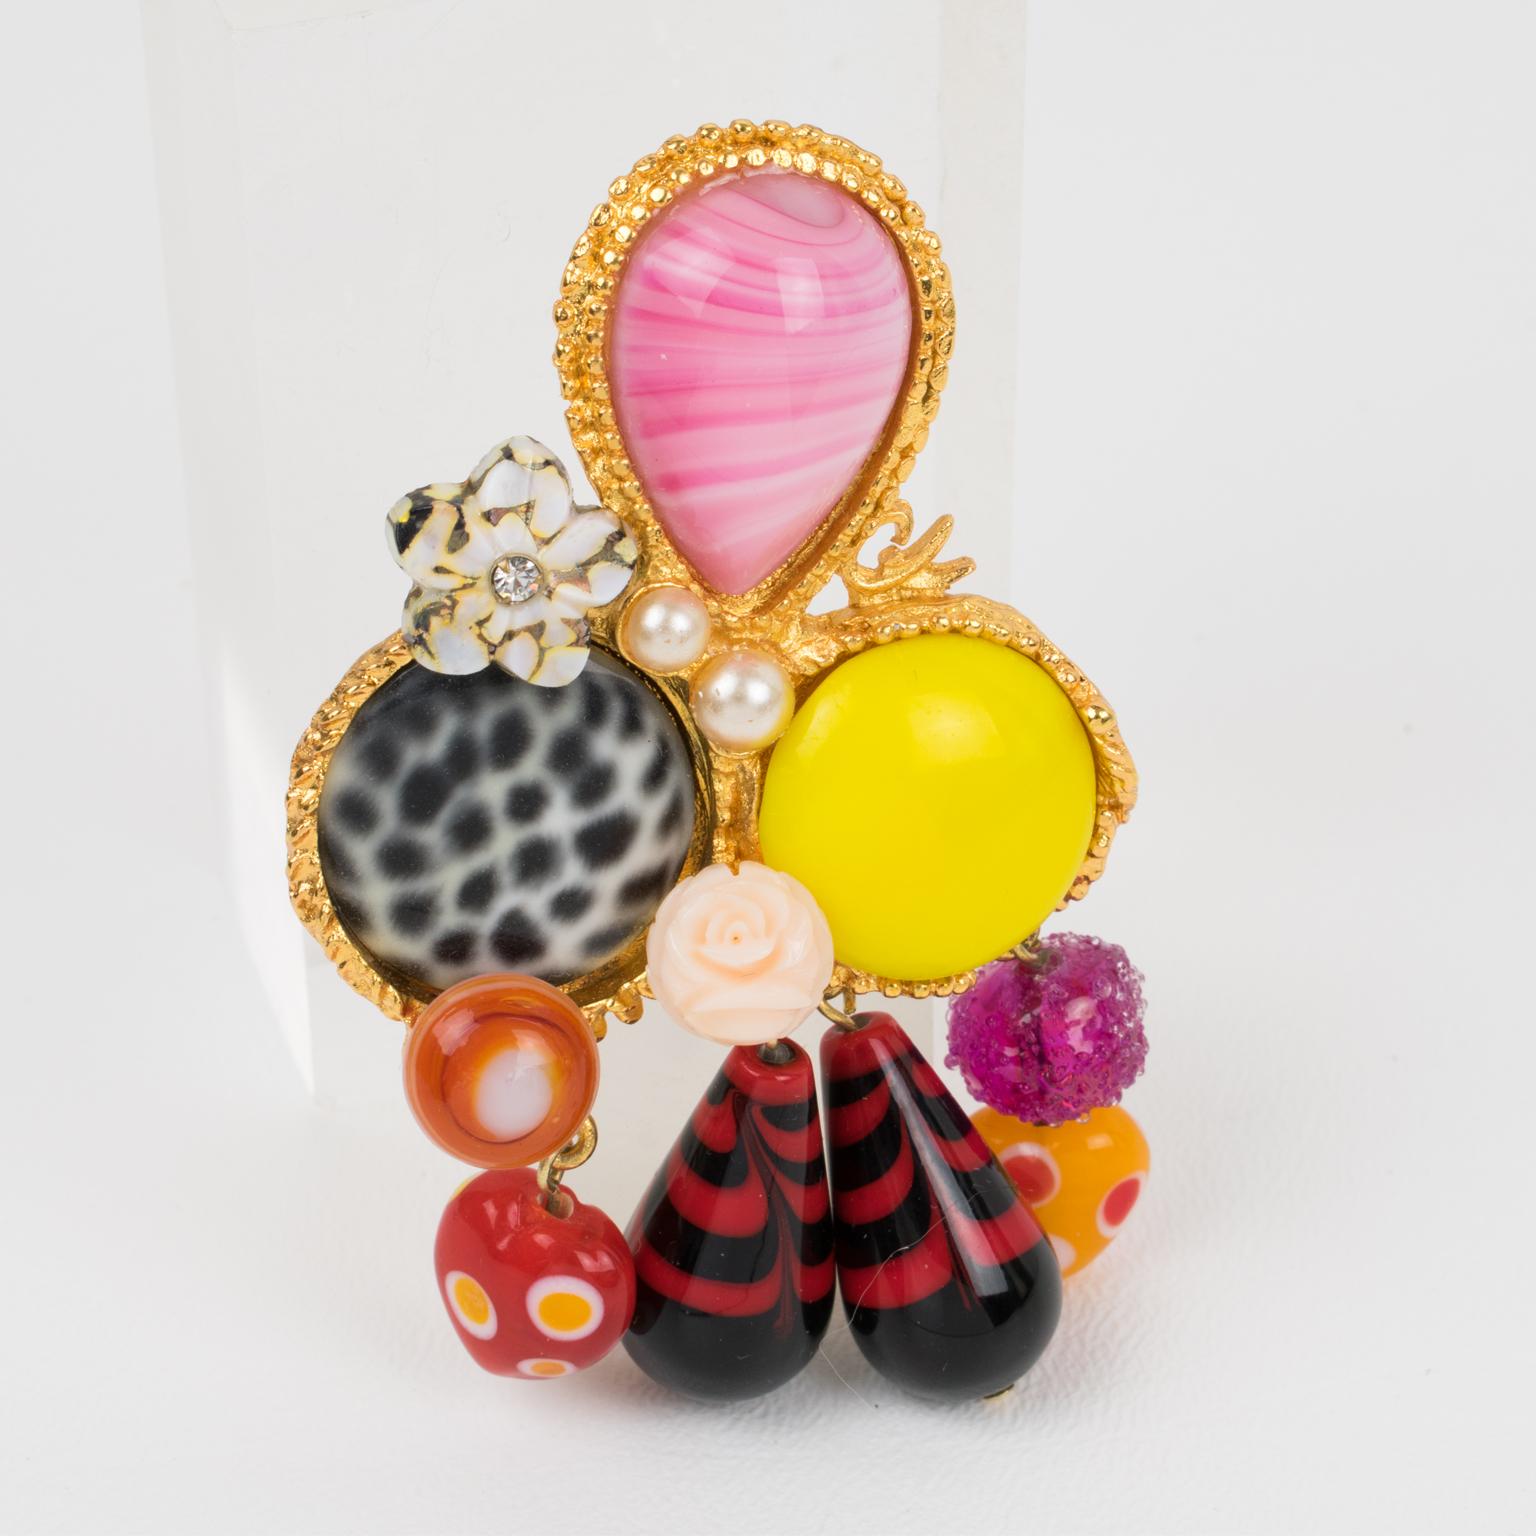 This mesmerizing Christian Lacroix Paris jeweled pin brooch features a geometric gilt metal framing with dangling charms, ornate with pearl-like, poured glass cabochons and pate de verre drop beads. The pin has superb assorted multicolor tones in